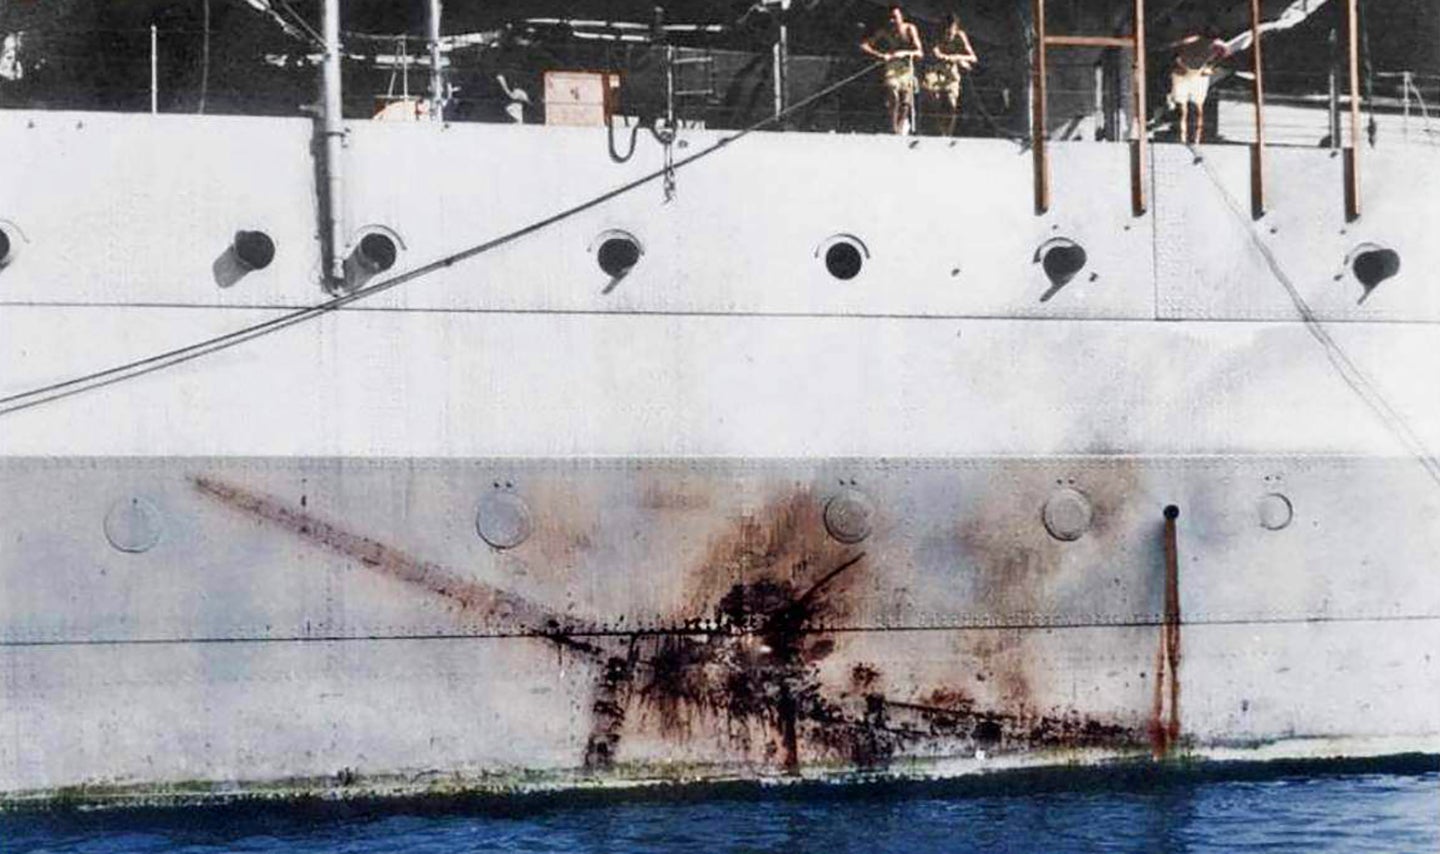 This Kamikaze Impact Mark On A British Cruiser Is A Testament To The Brutality Of The Pacific War